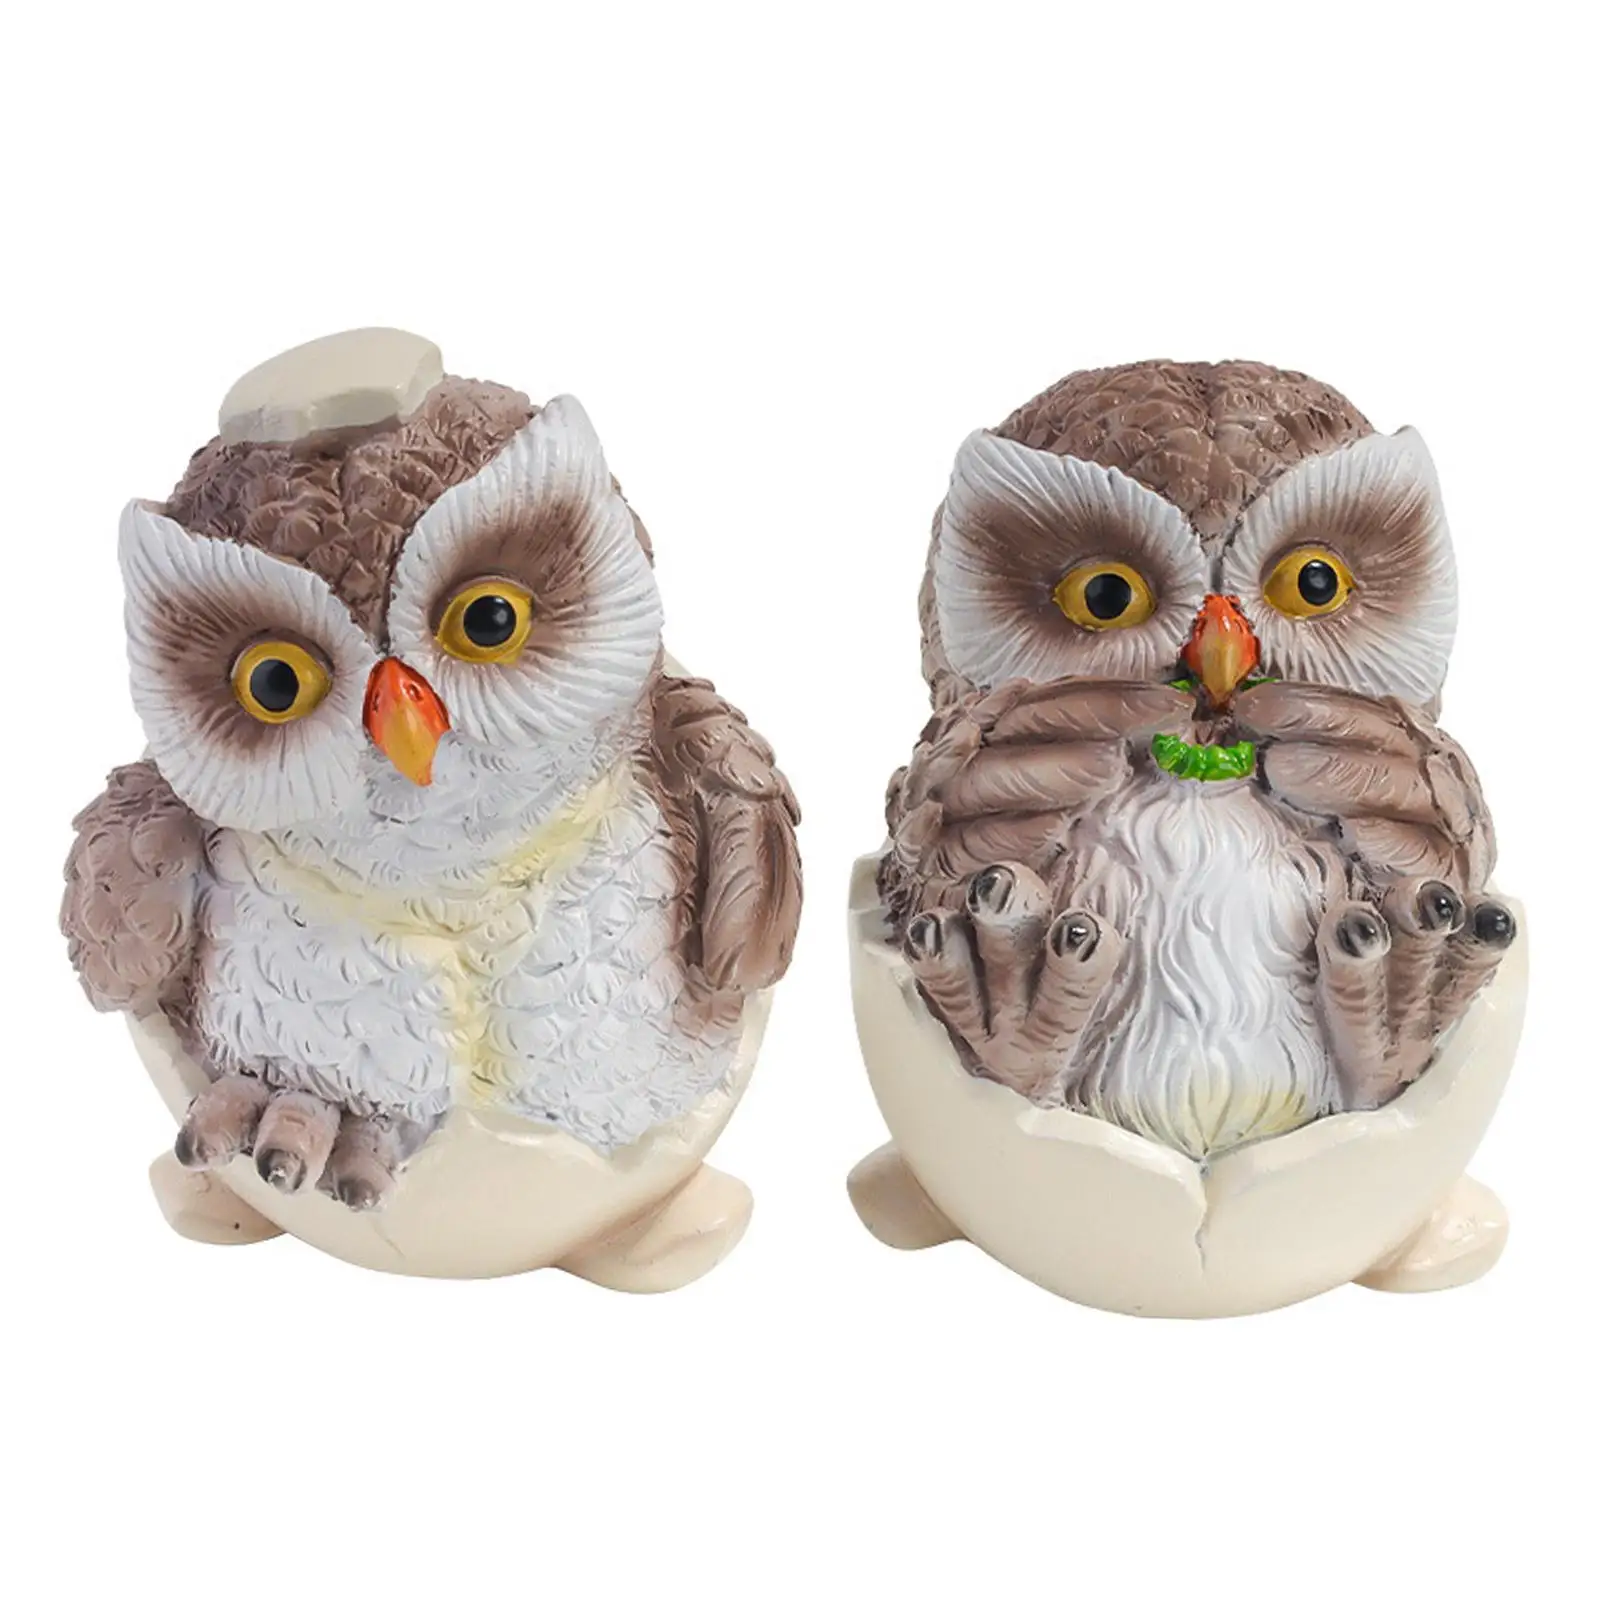 2Pcs Creative Owl Statues Figurines Decoration Decorative Gifts Works Ornament for Garden Office New Year